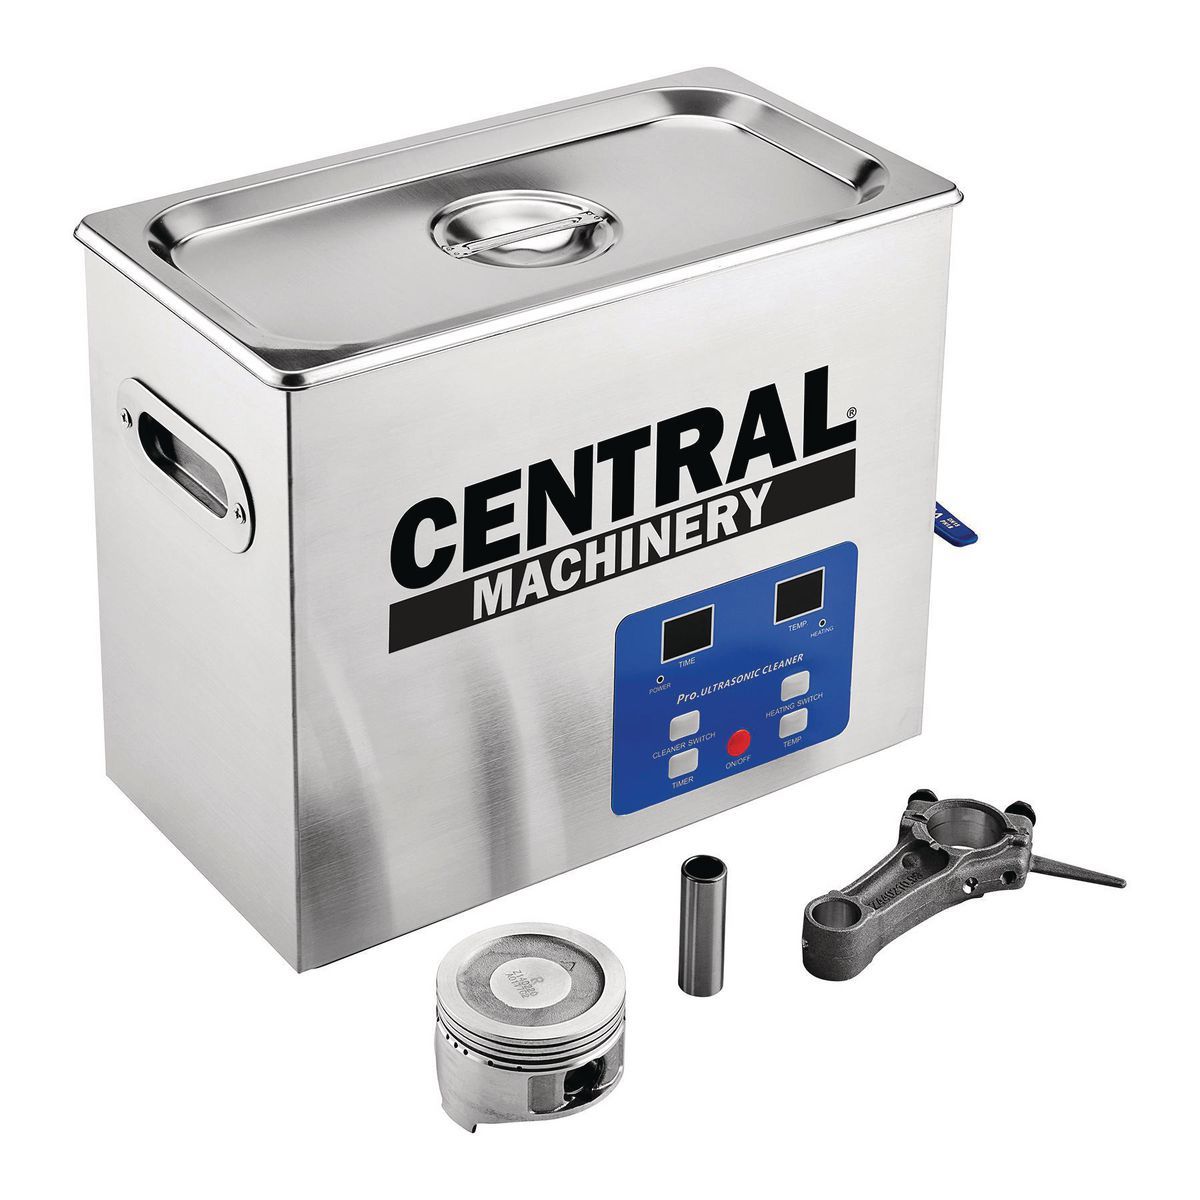 CENTRAL MACHINERY 6 Liter Ultrasonic Parts Cleaner